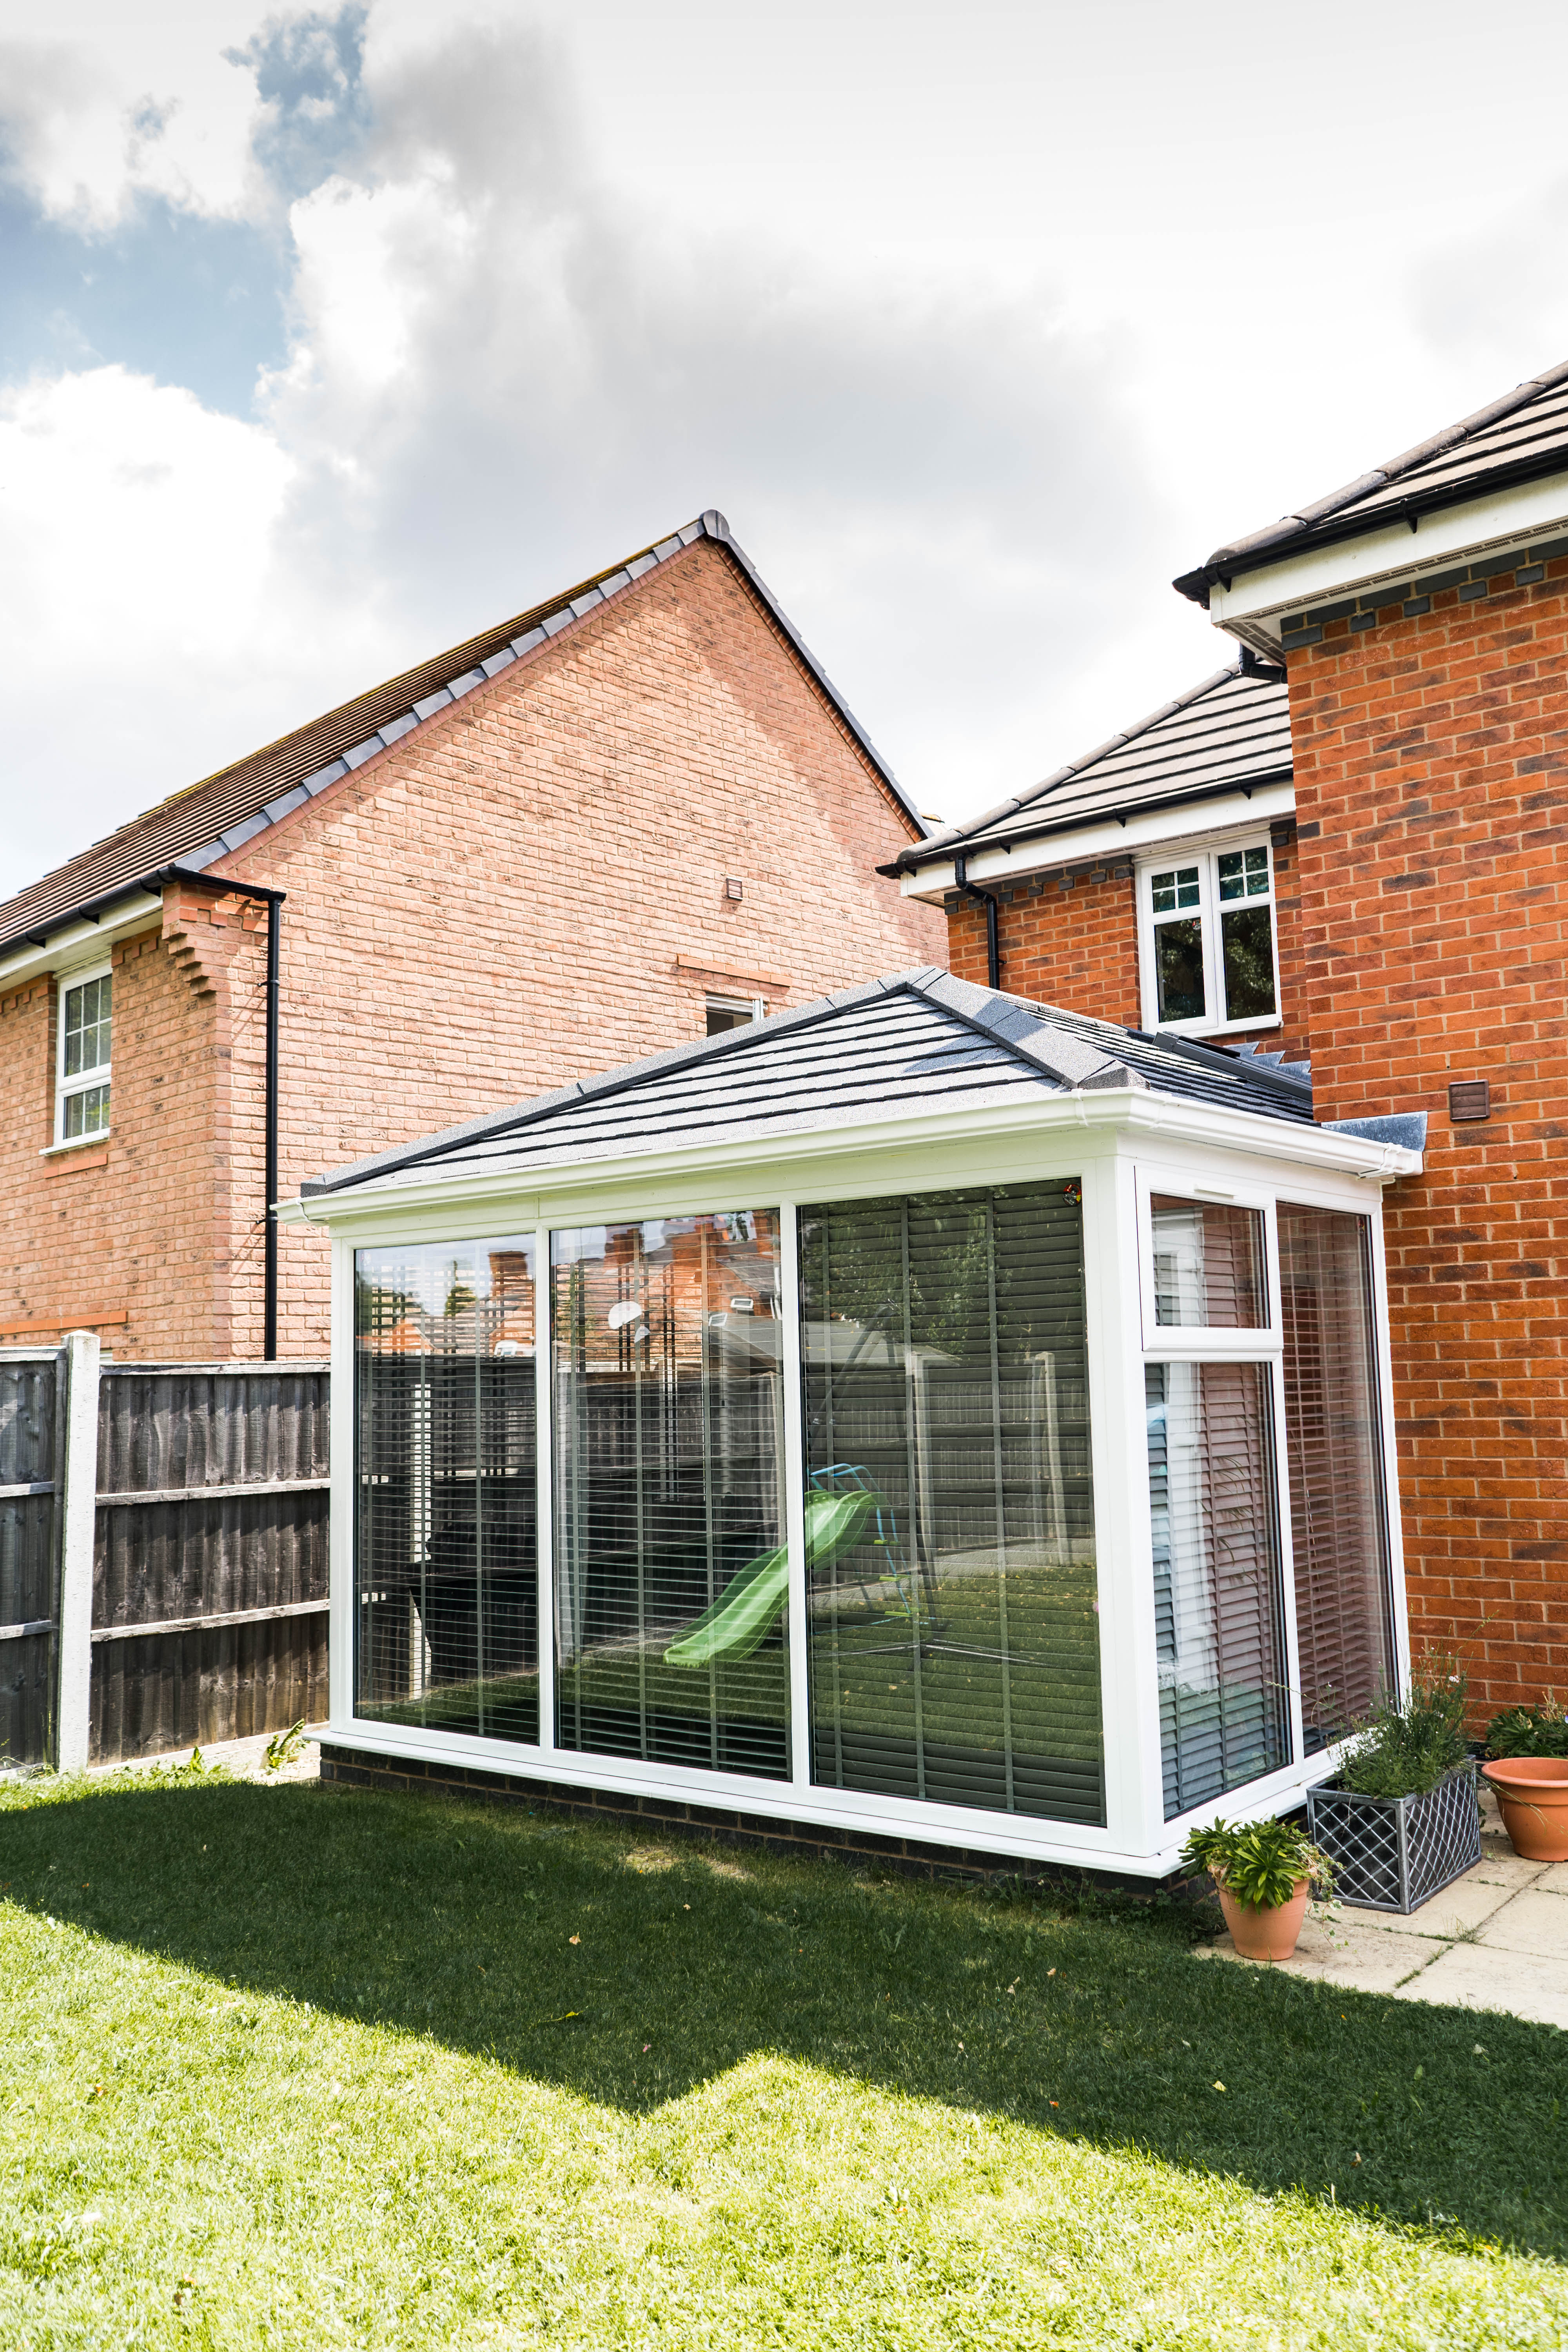 And That Is Our Take On How To Insulate A Conservatory Roof…